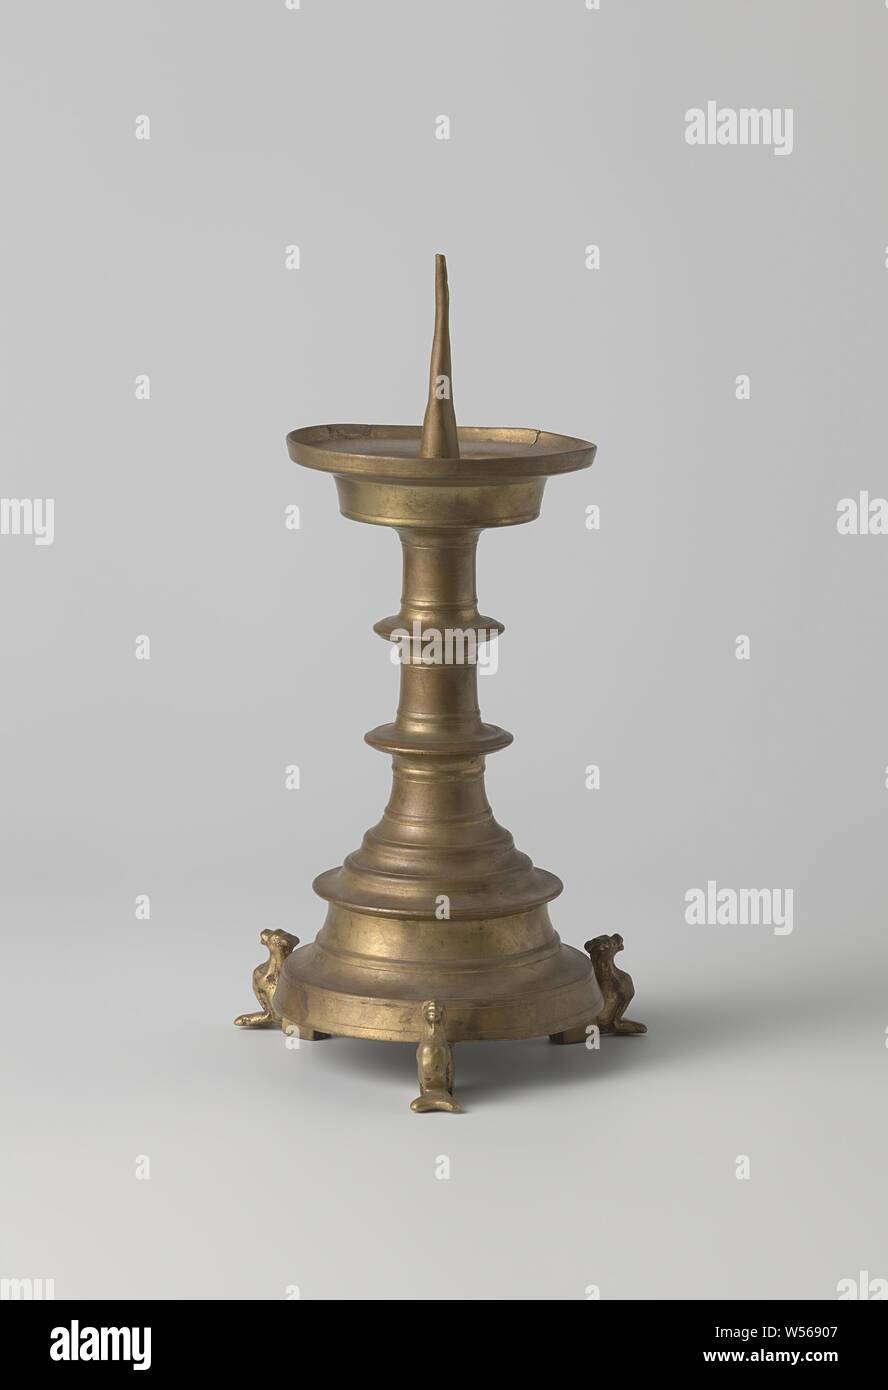 376 Small Antique Oil Lamp Images, Stock Photos, 3D objects, & Vectors